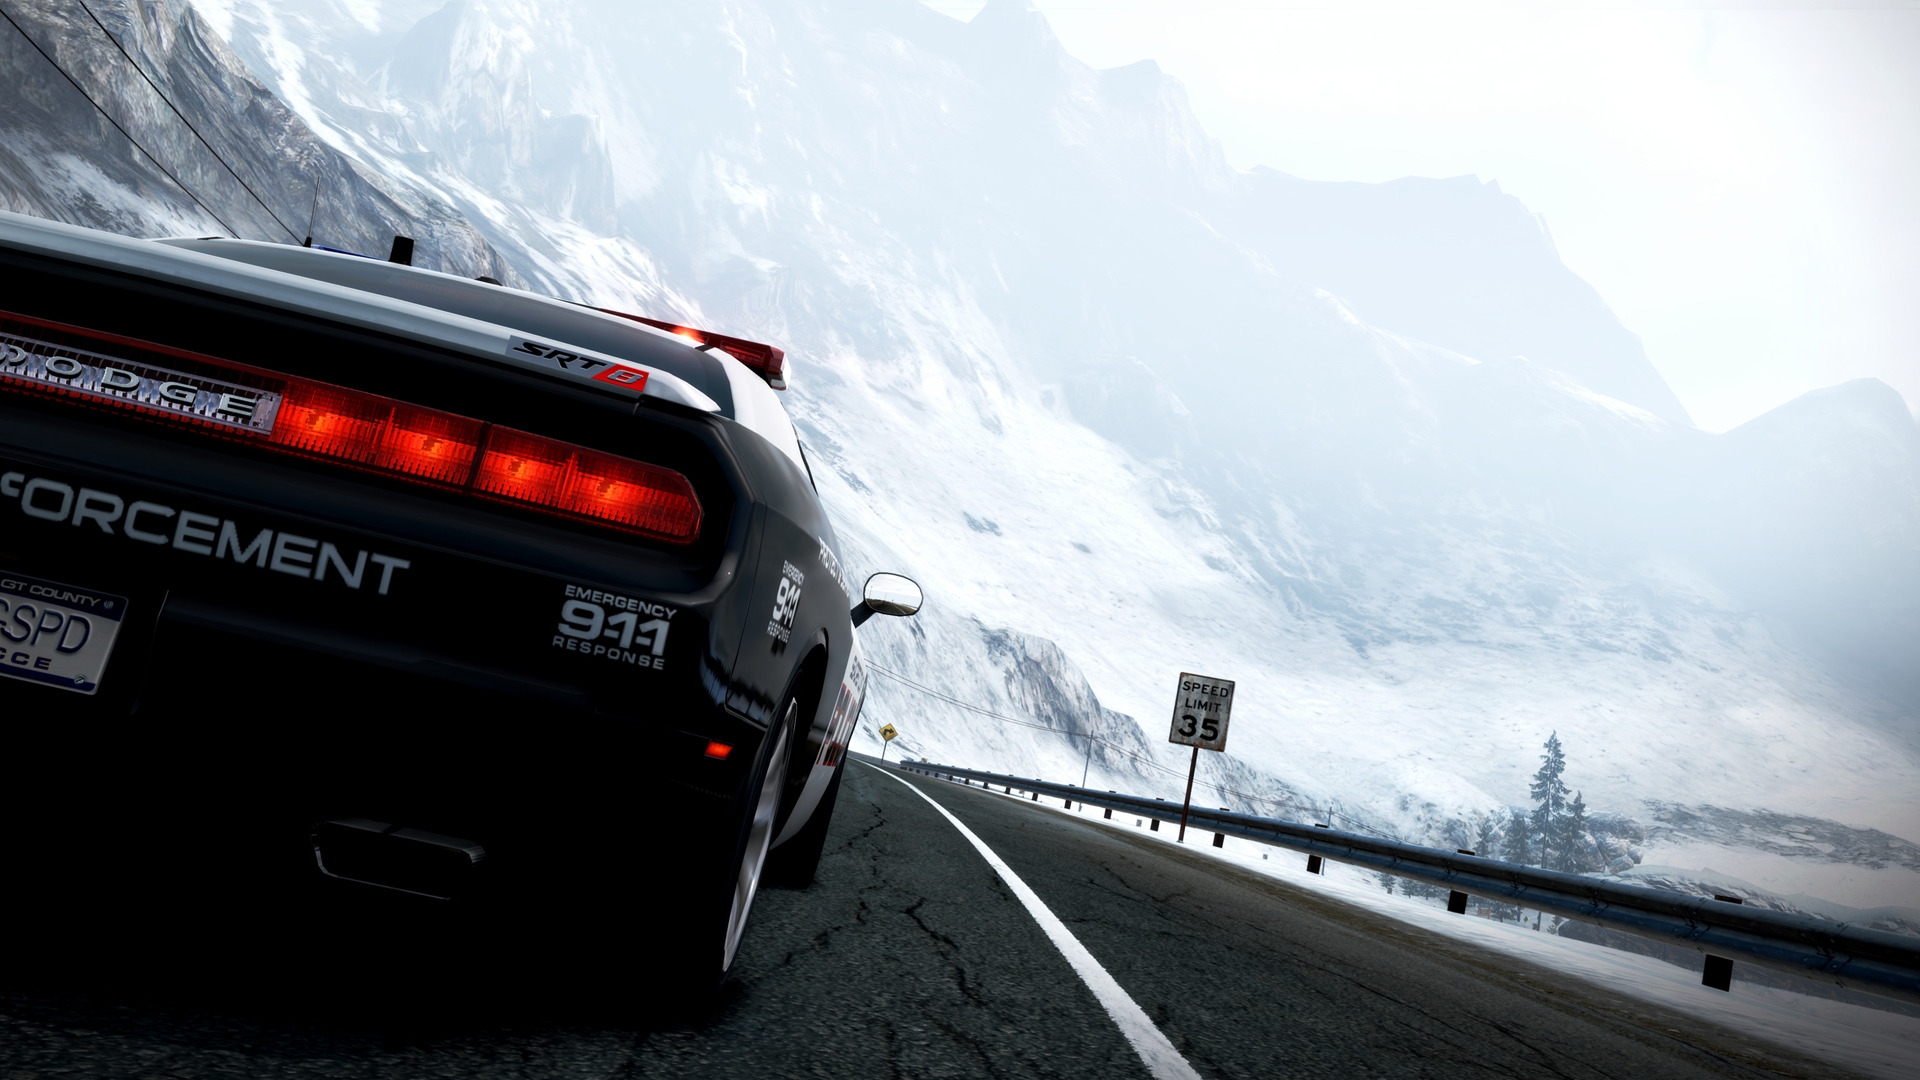 NFS Hot Pursuit Police Car for 1920 x 1080 HDTV 1080p resolution